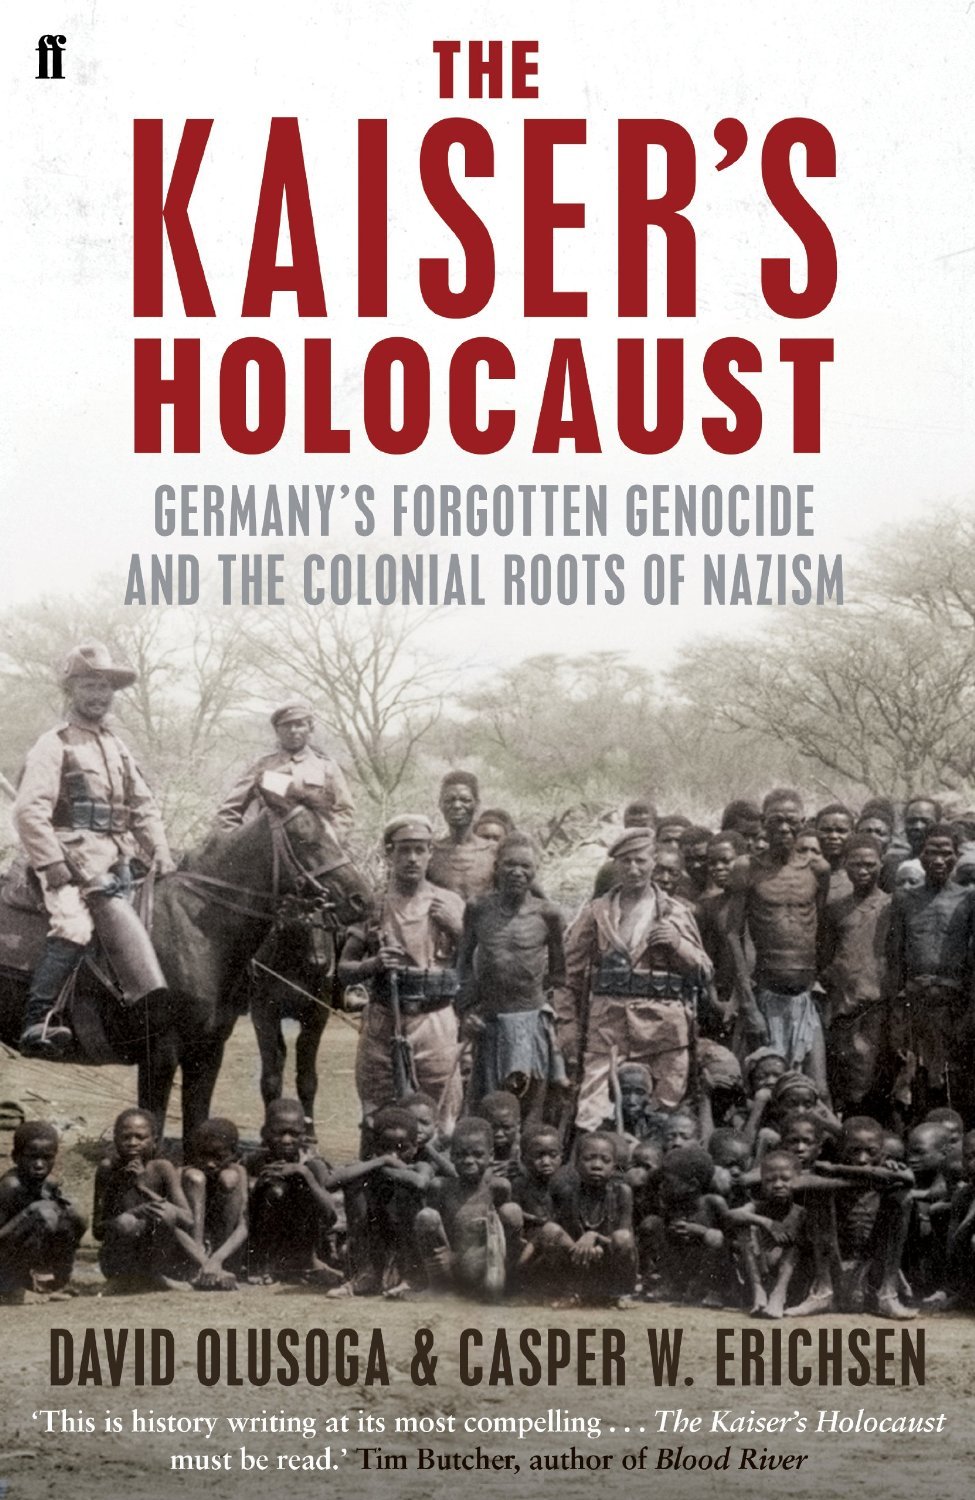 The Kaiser’s Holocaust: Germany’s Forgotten Genocide and the Colonial Roots of Nazism by David Olusoga & Casper W. Erichsen
On 12 May 1883, the German flag was raised on the coast of South-West Africa, modern Namibia - the beginnings of Germany’s...